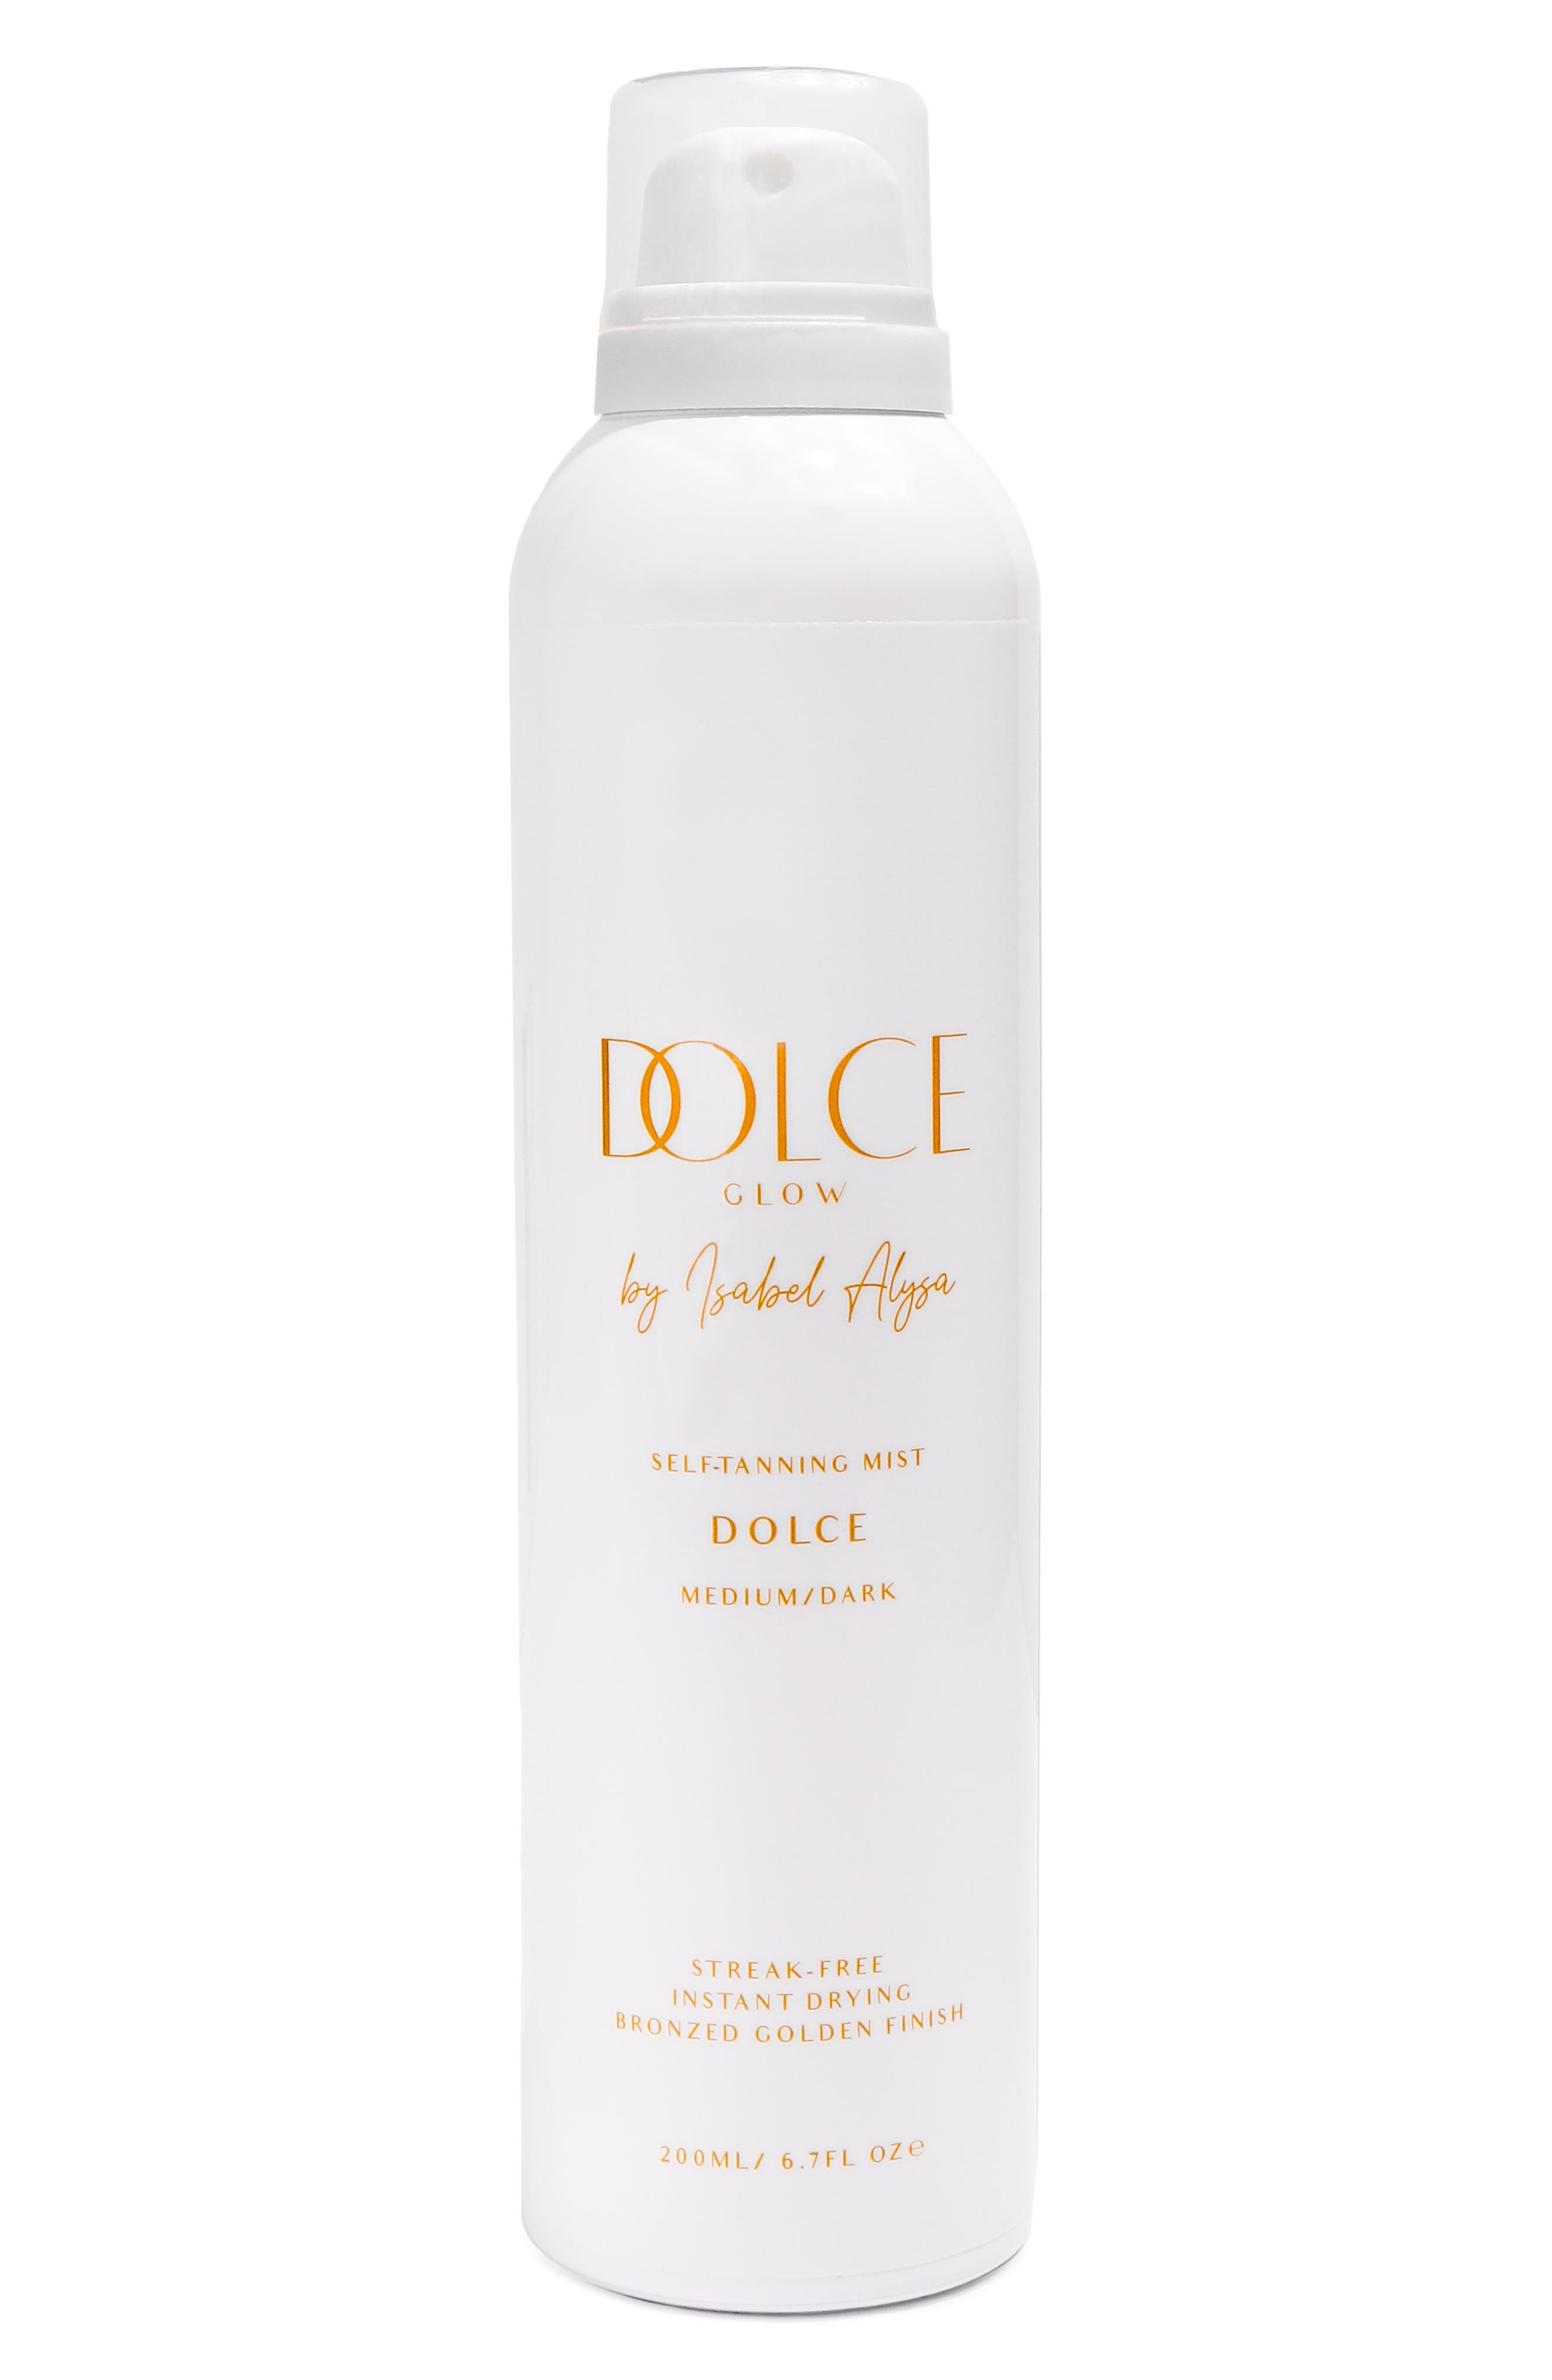 Dolce Glow by Isabel Alysa Self-Tanning Mist in None at Nordstrom